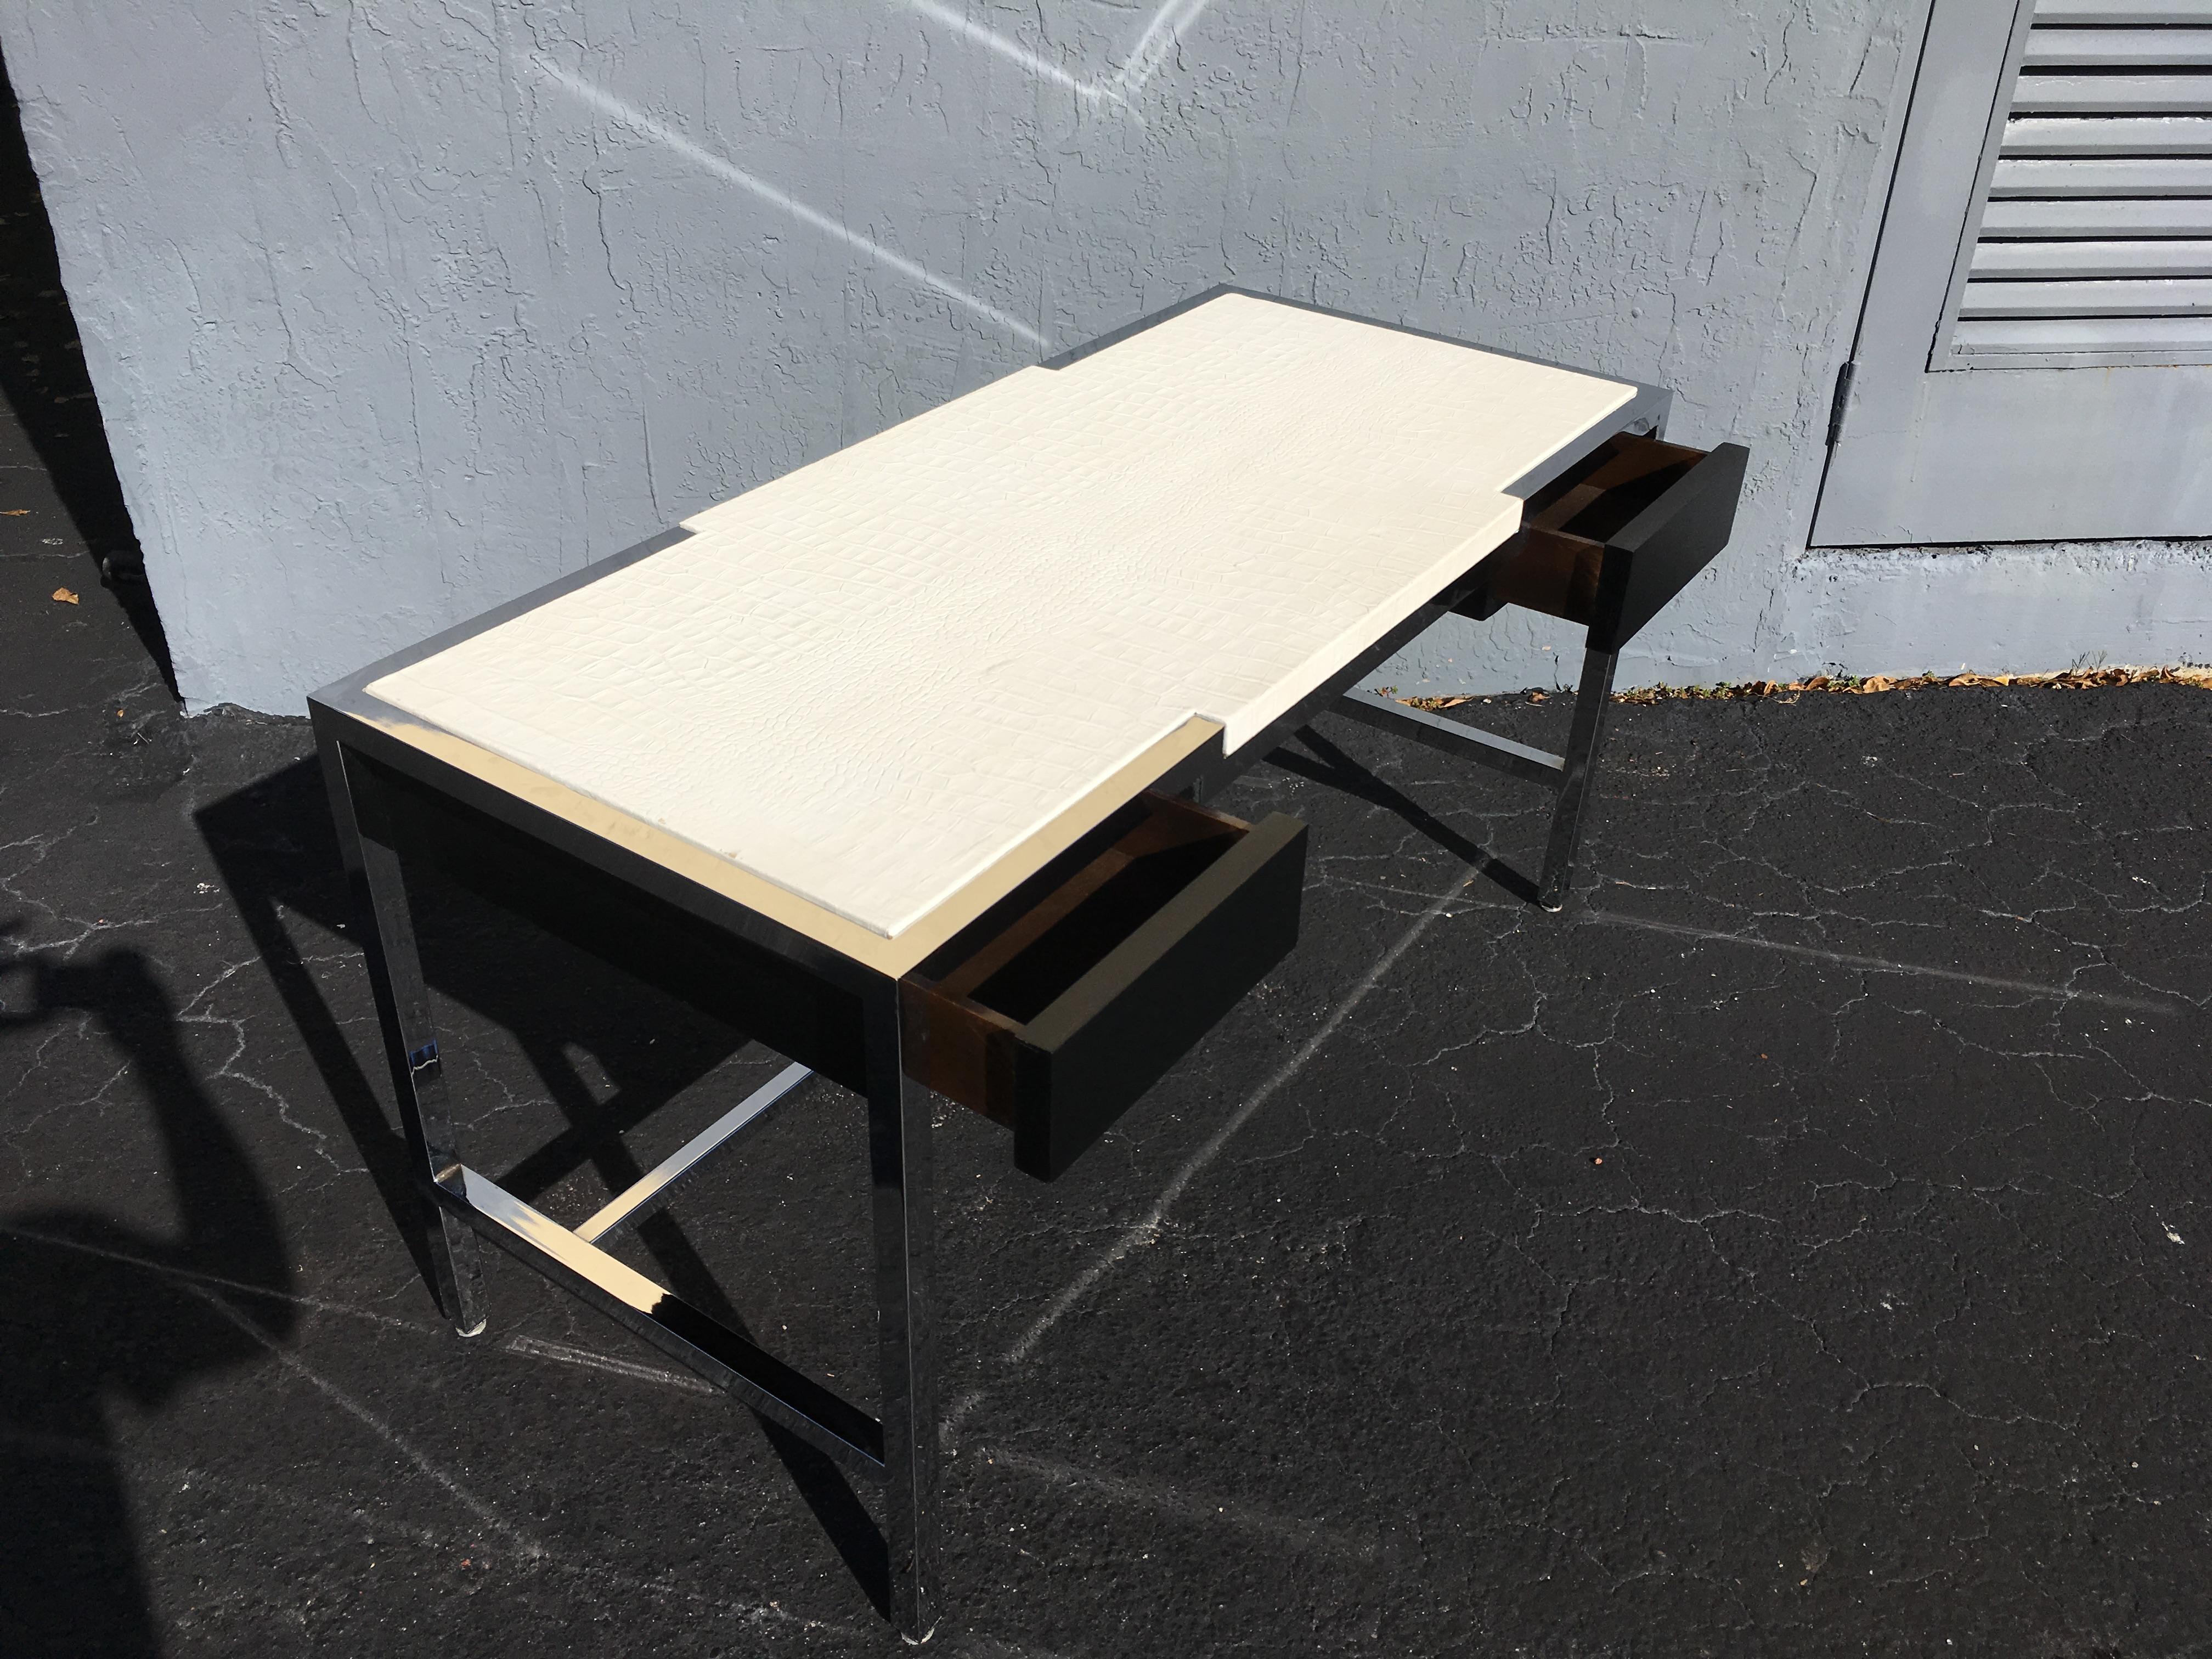 Late 20th Century Midcentury Chrome Desk with Alligator Leather Top by Century